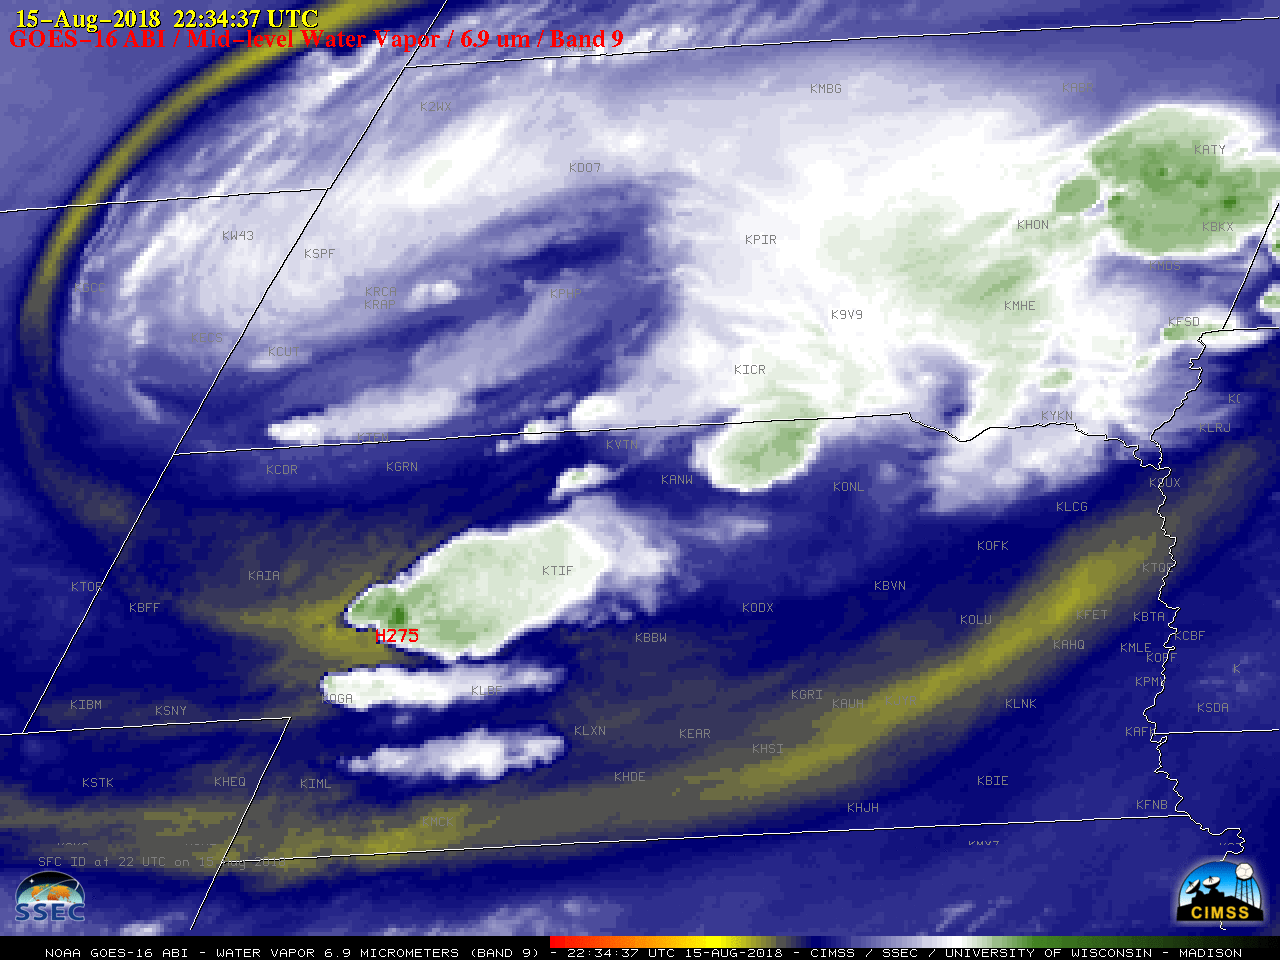 GOES-16 Mid-level Water Vapor (6.9 µm) images, with SPC storm reports plotted in red [click to play MP4 animation]